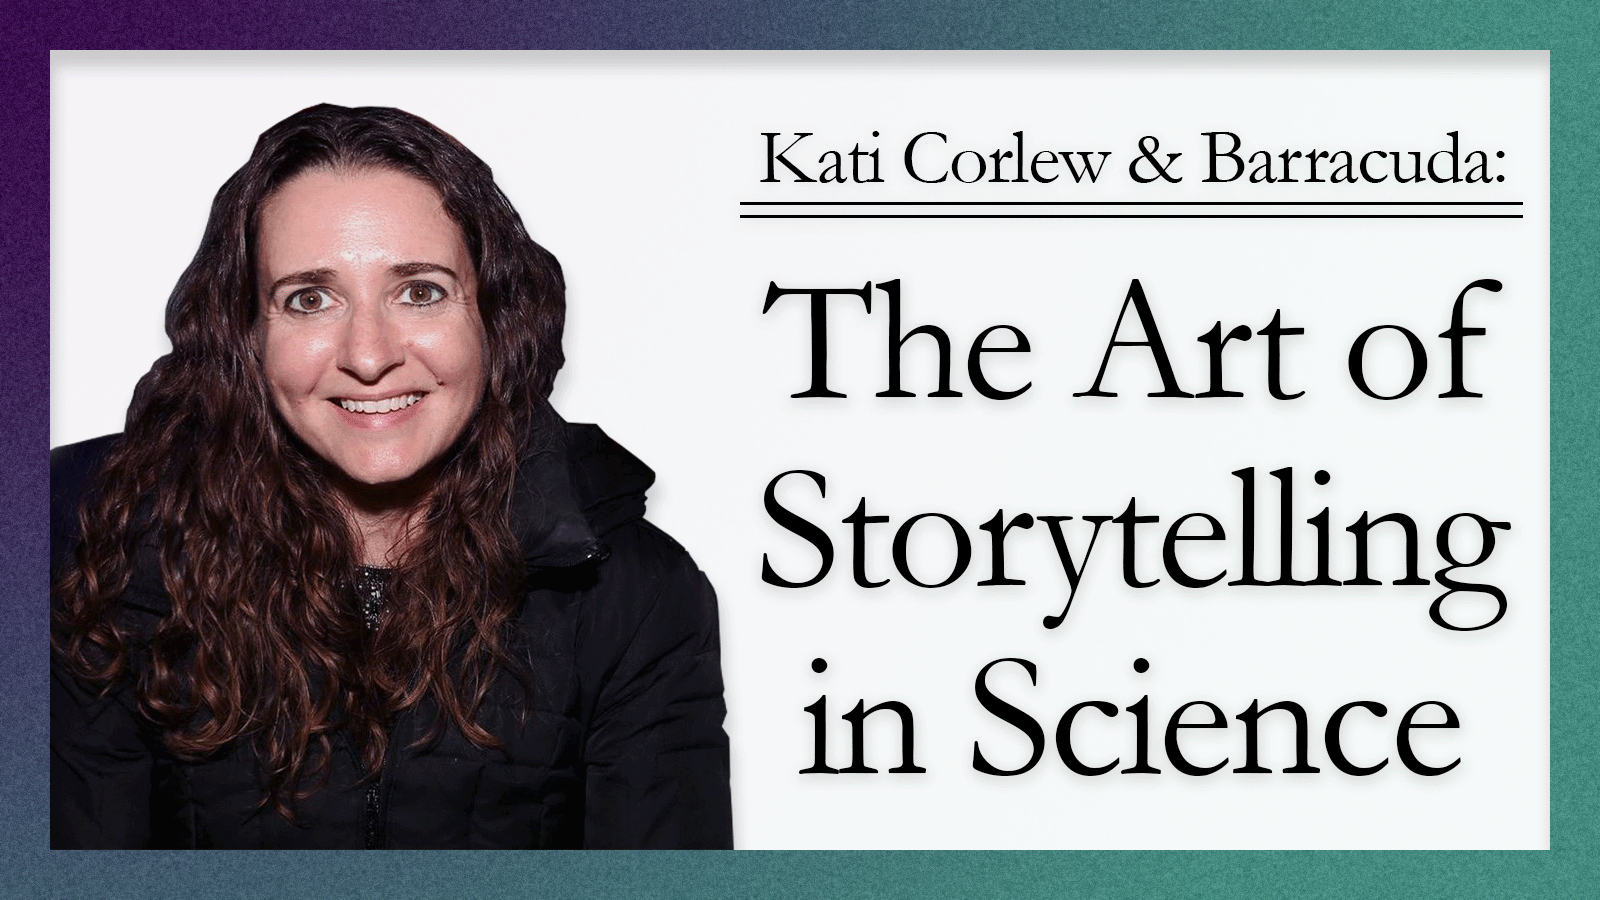 Photo of Kati Corlew with text Kati Corlew & Barracuda: The Art of Storytelling in Science